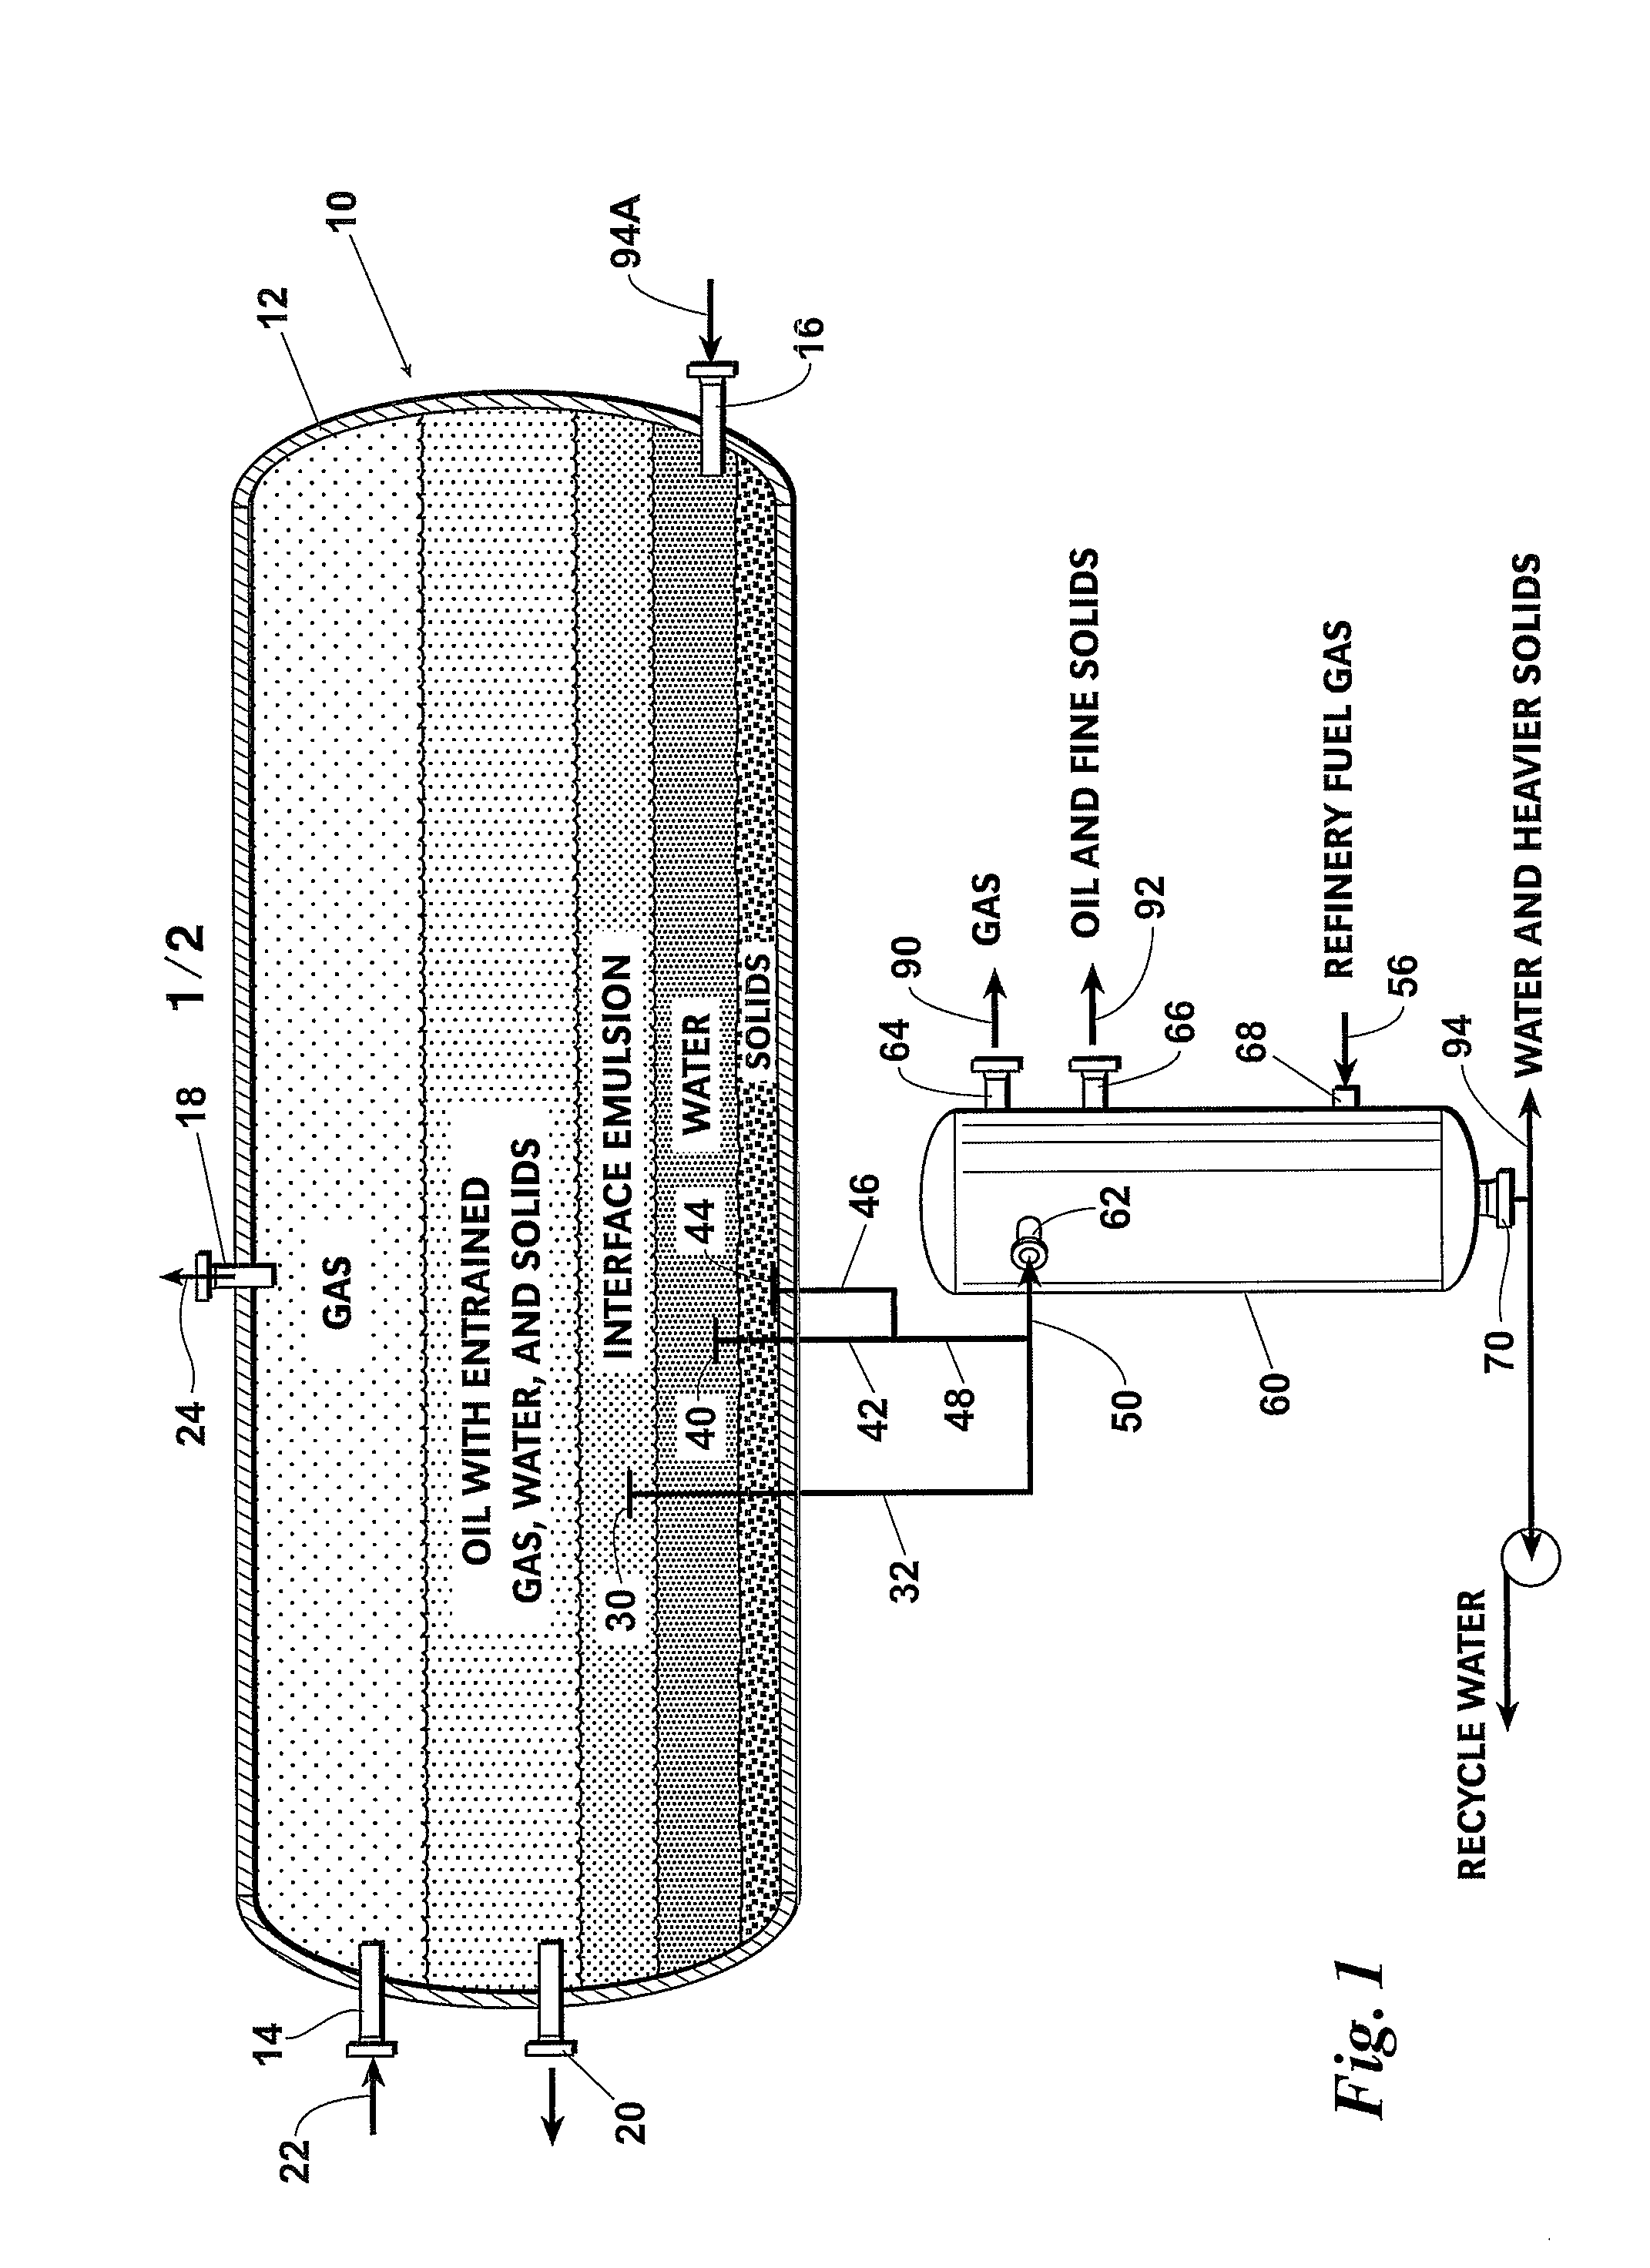 Method to Process Effluent Brine and Interface Rag from an Oil Dehydration/Desalting System